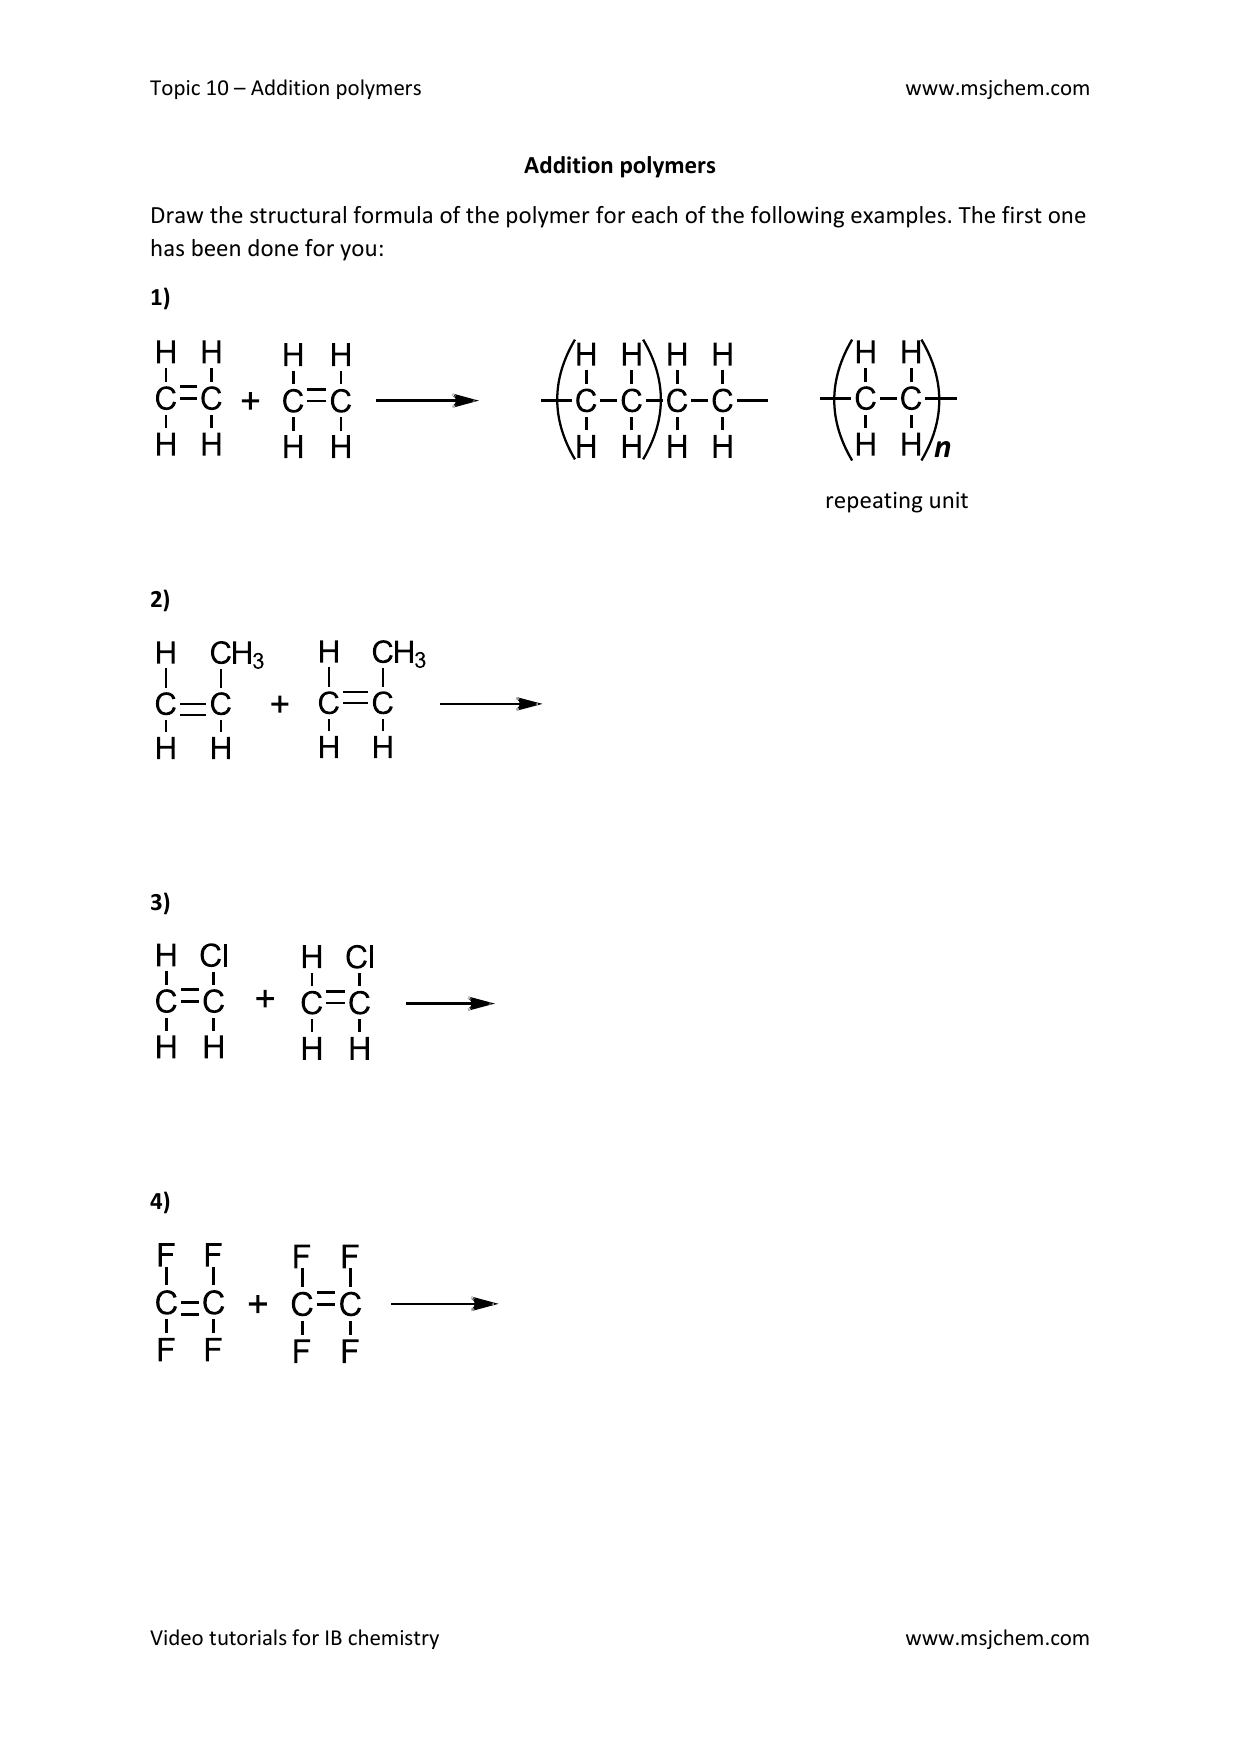 topic-10-addition-polymers